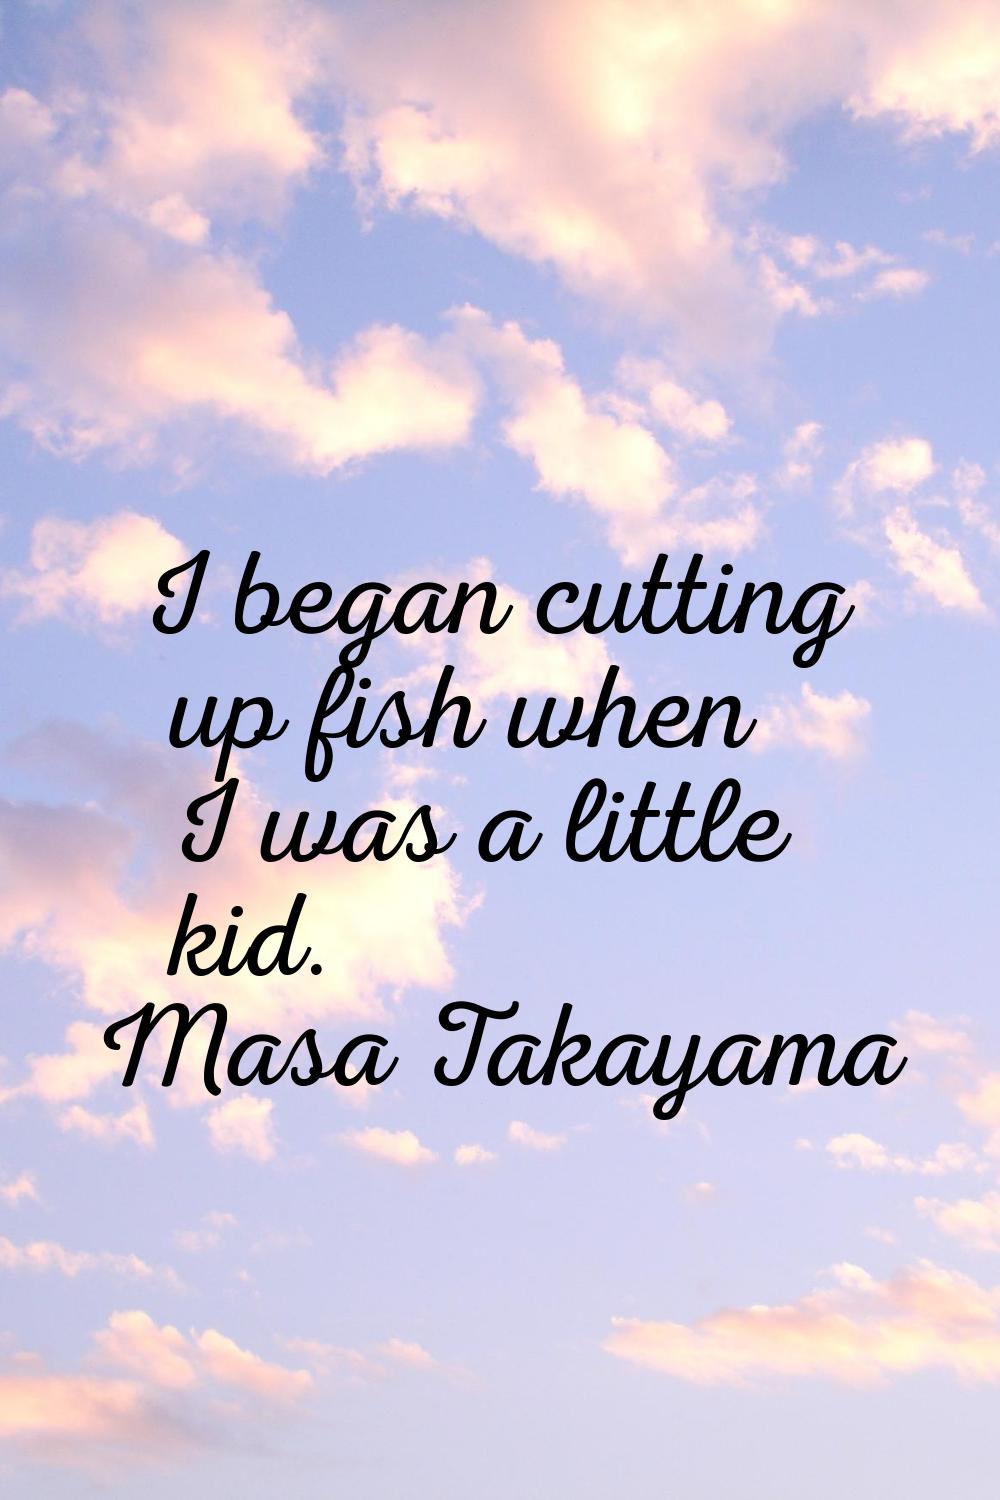 I began cutting up fish when I was a little kid.